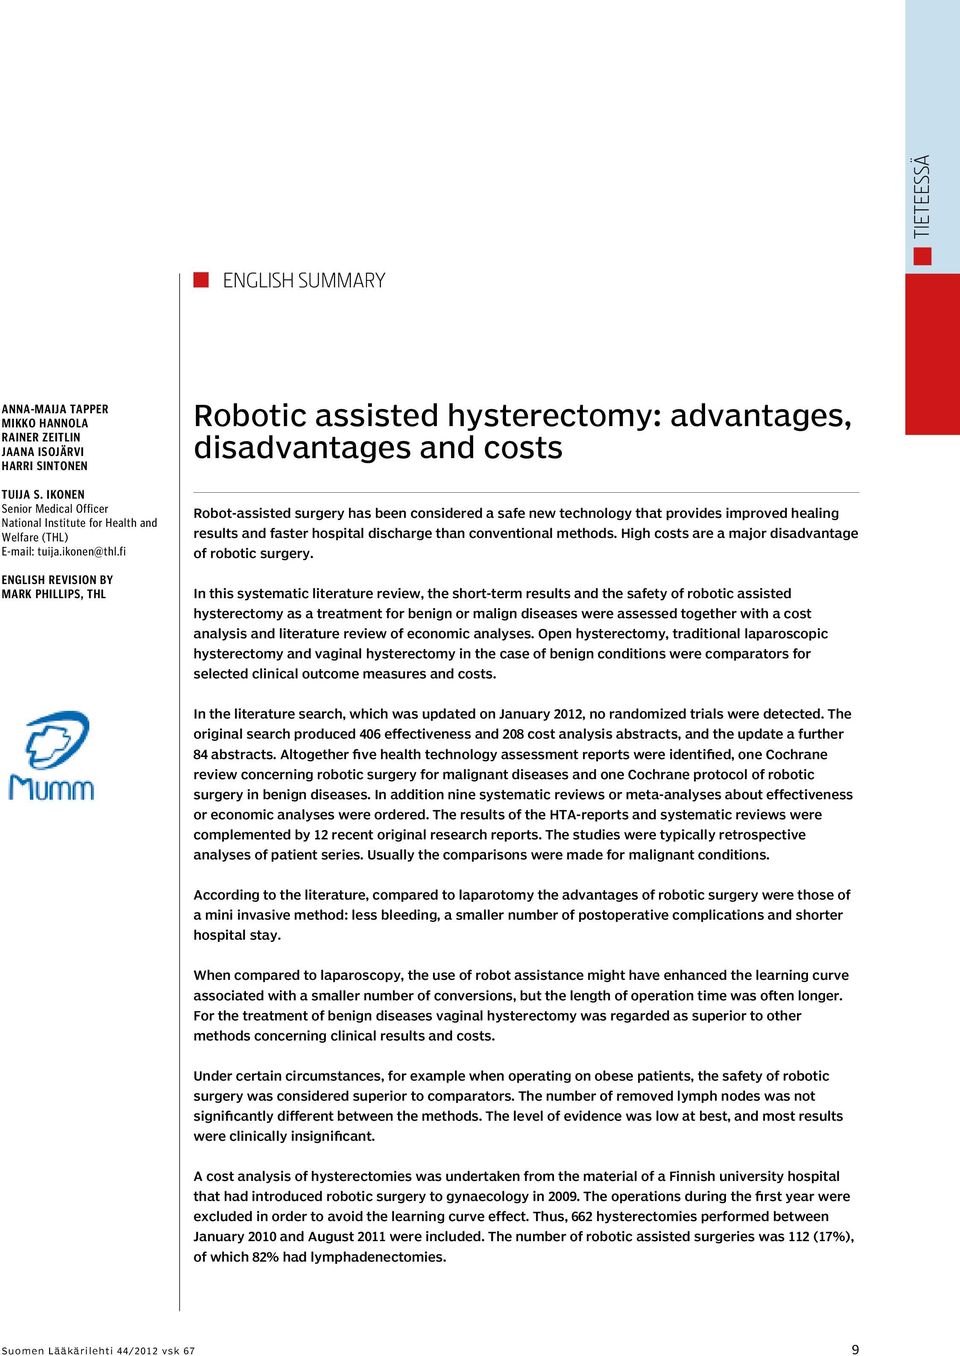 fi English revision by Mark Phillips, THL Robotic assisted hysterectomy: advantages, disadvantages and costs Robot-assisted surgery has been considered a safe new technology that provides improved